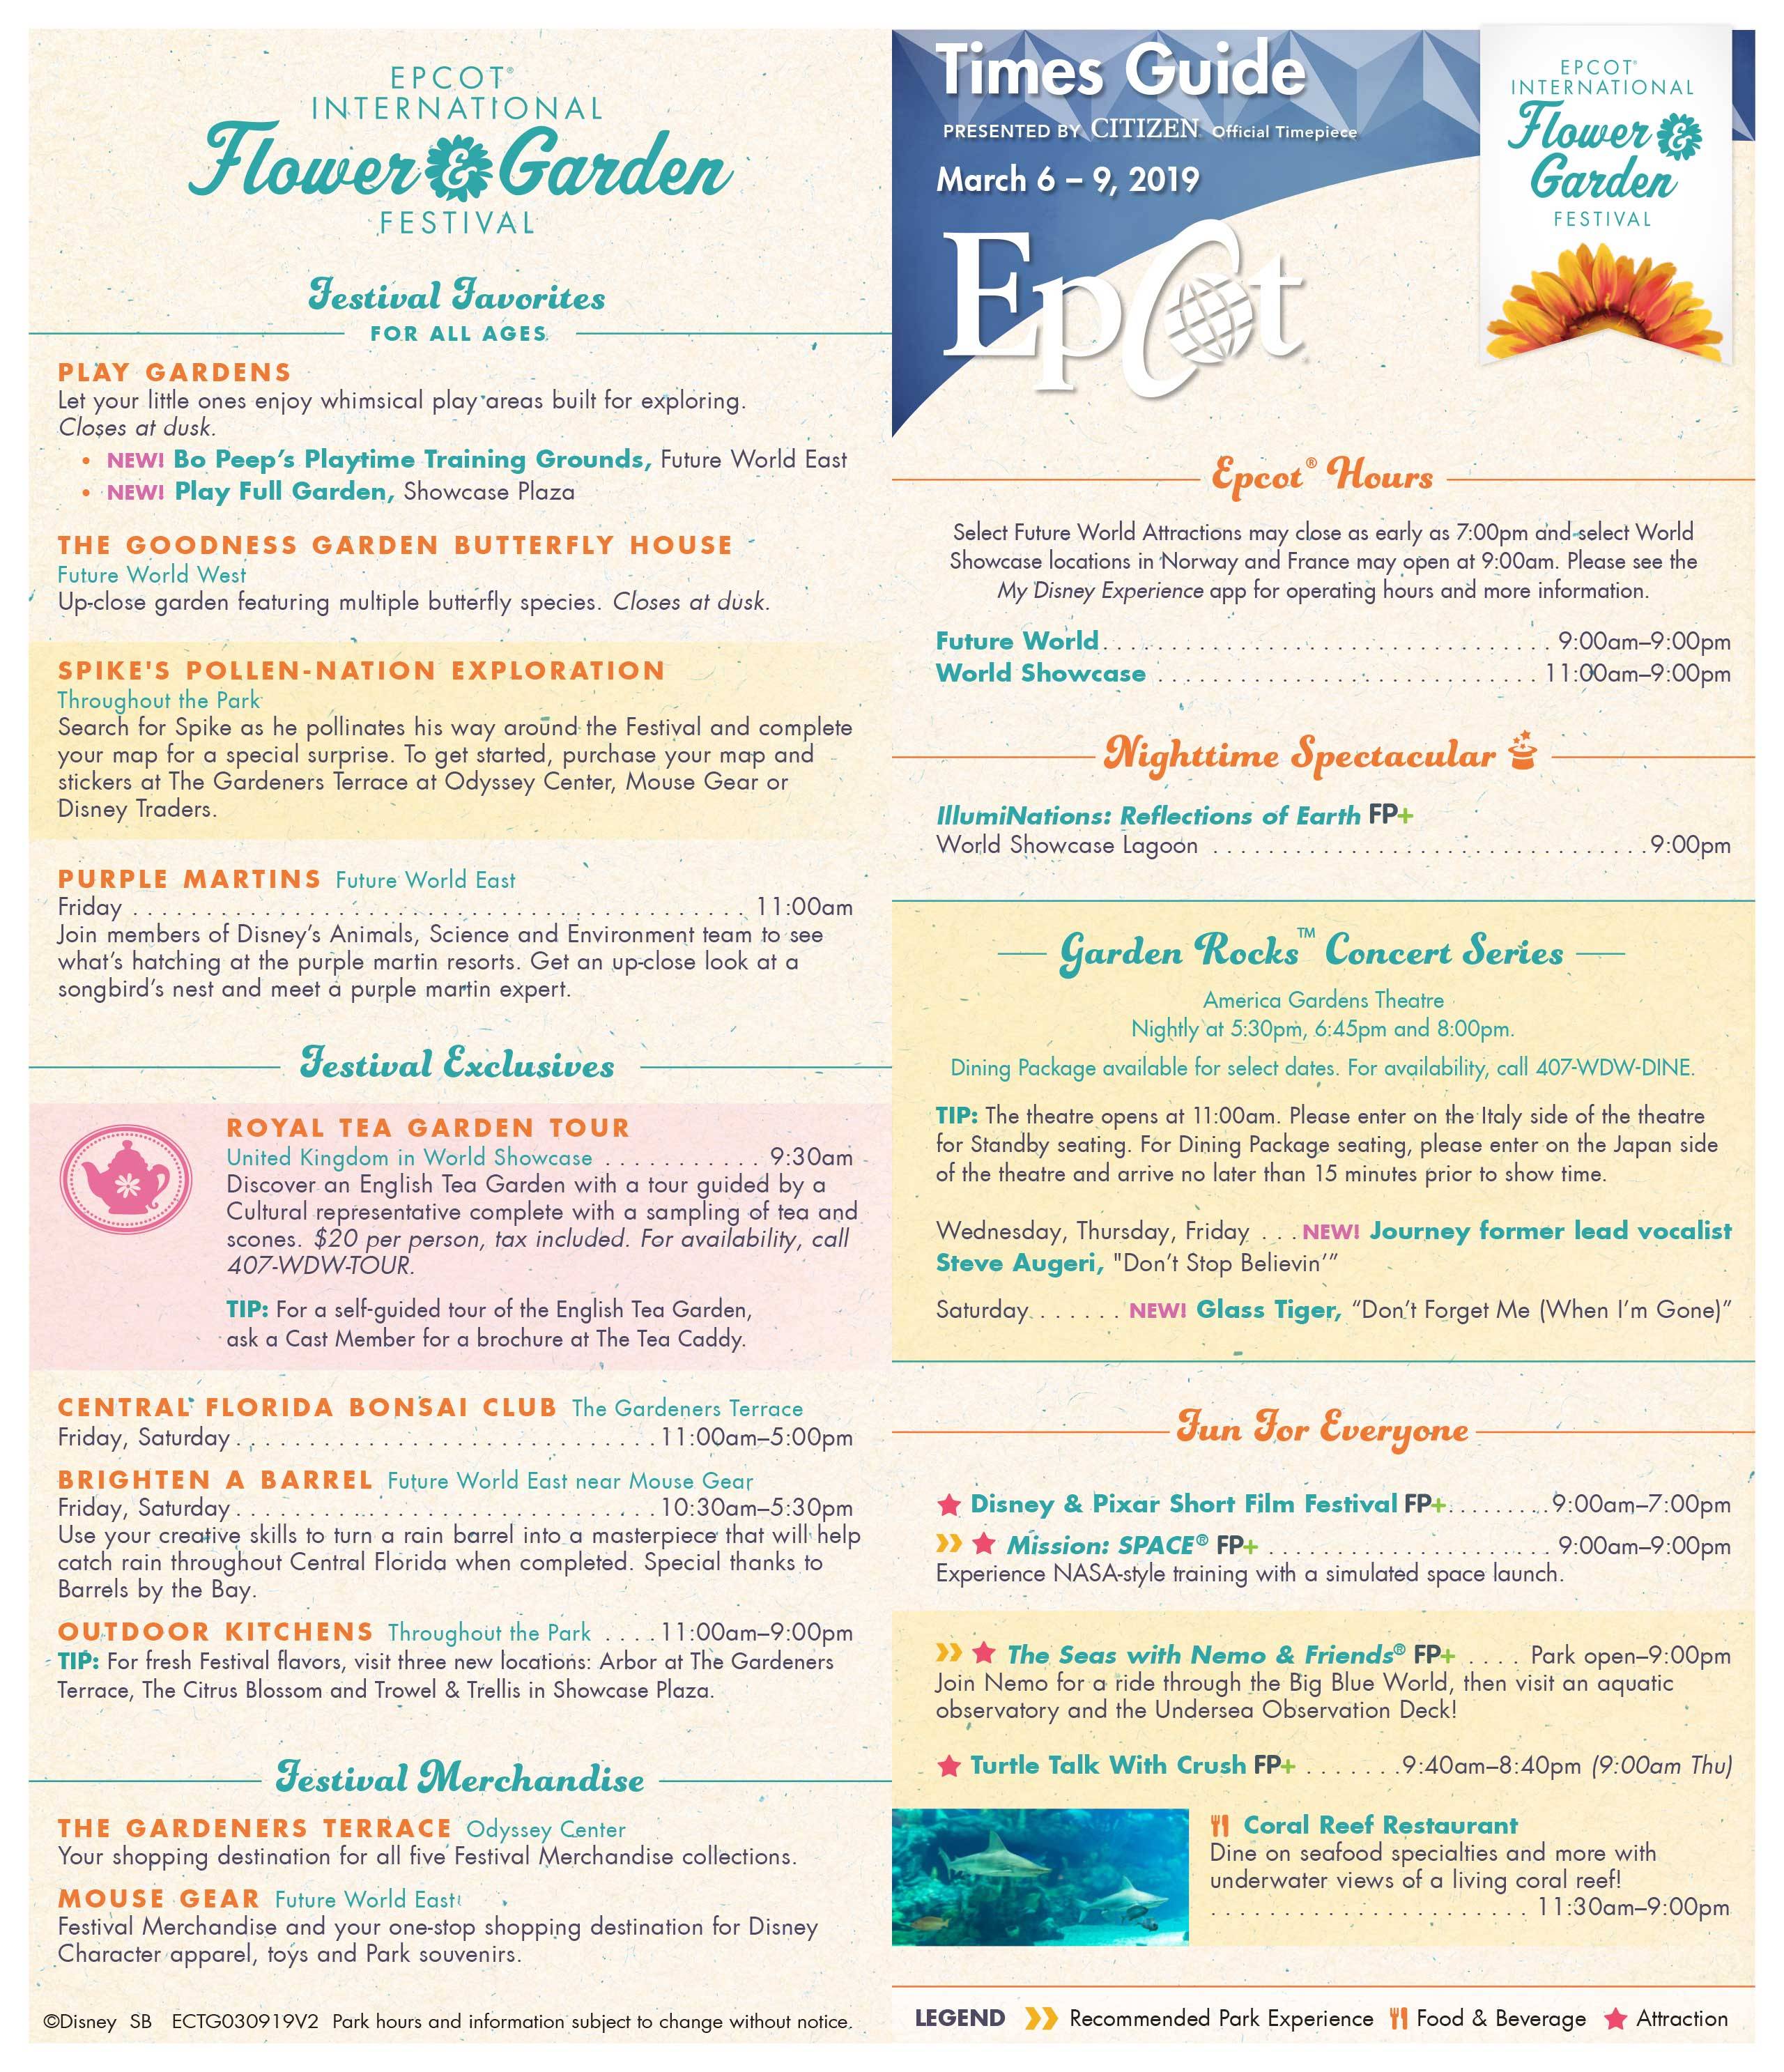 Epcot International Flower and Garden Festival Times Guide March 2019